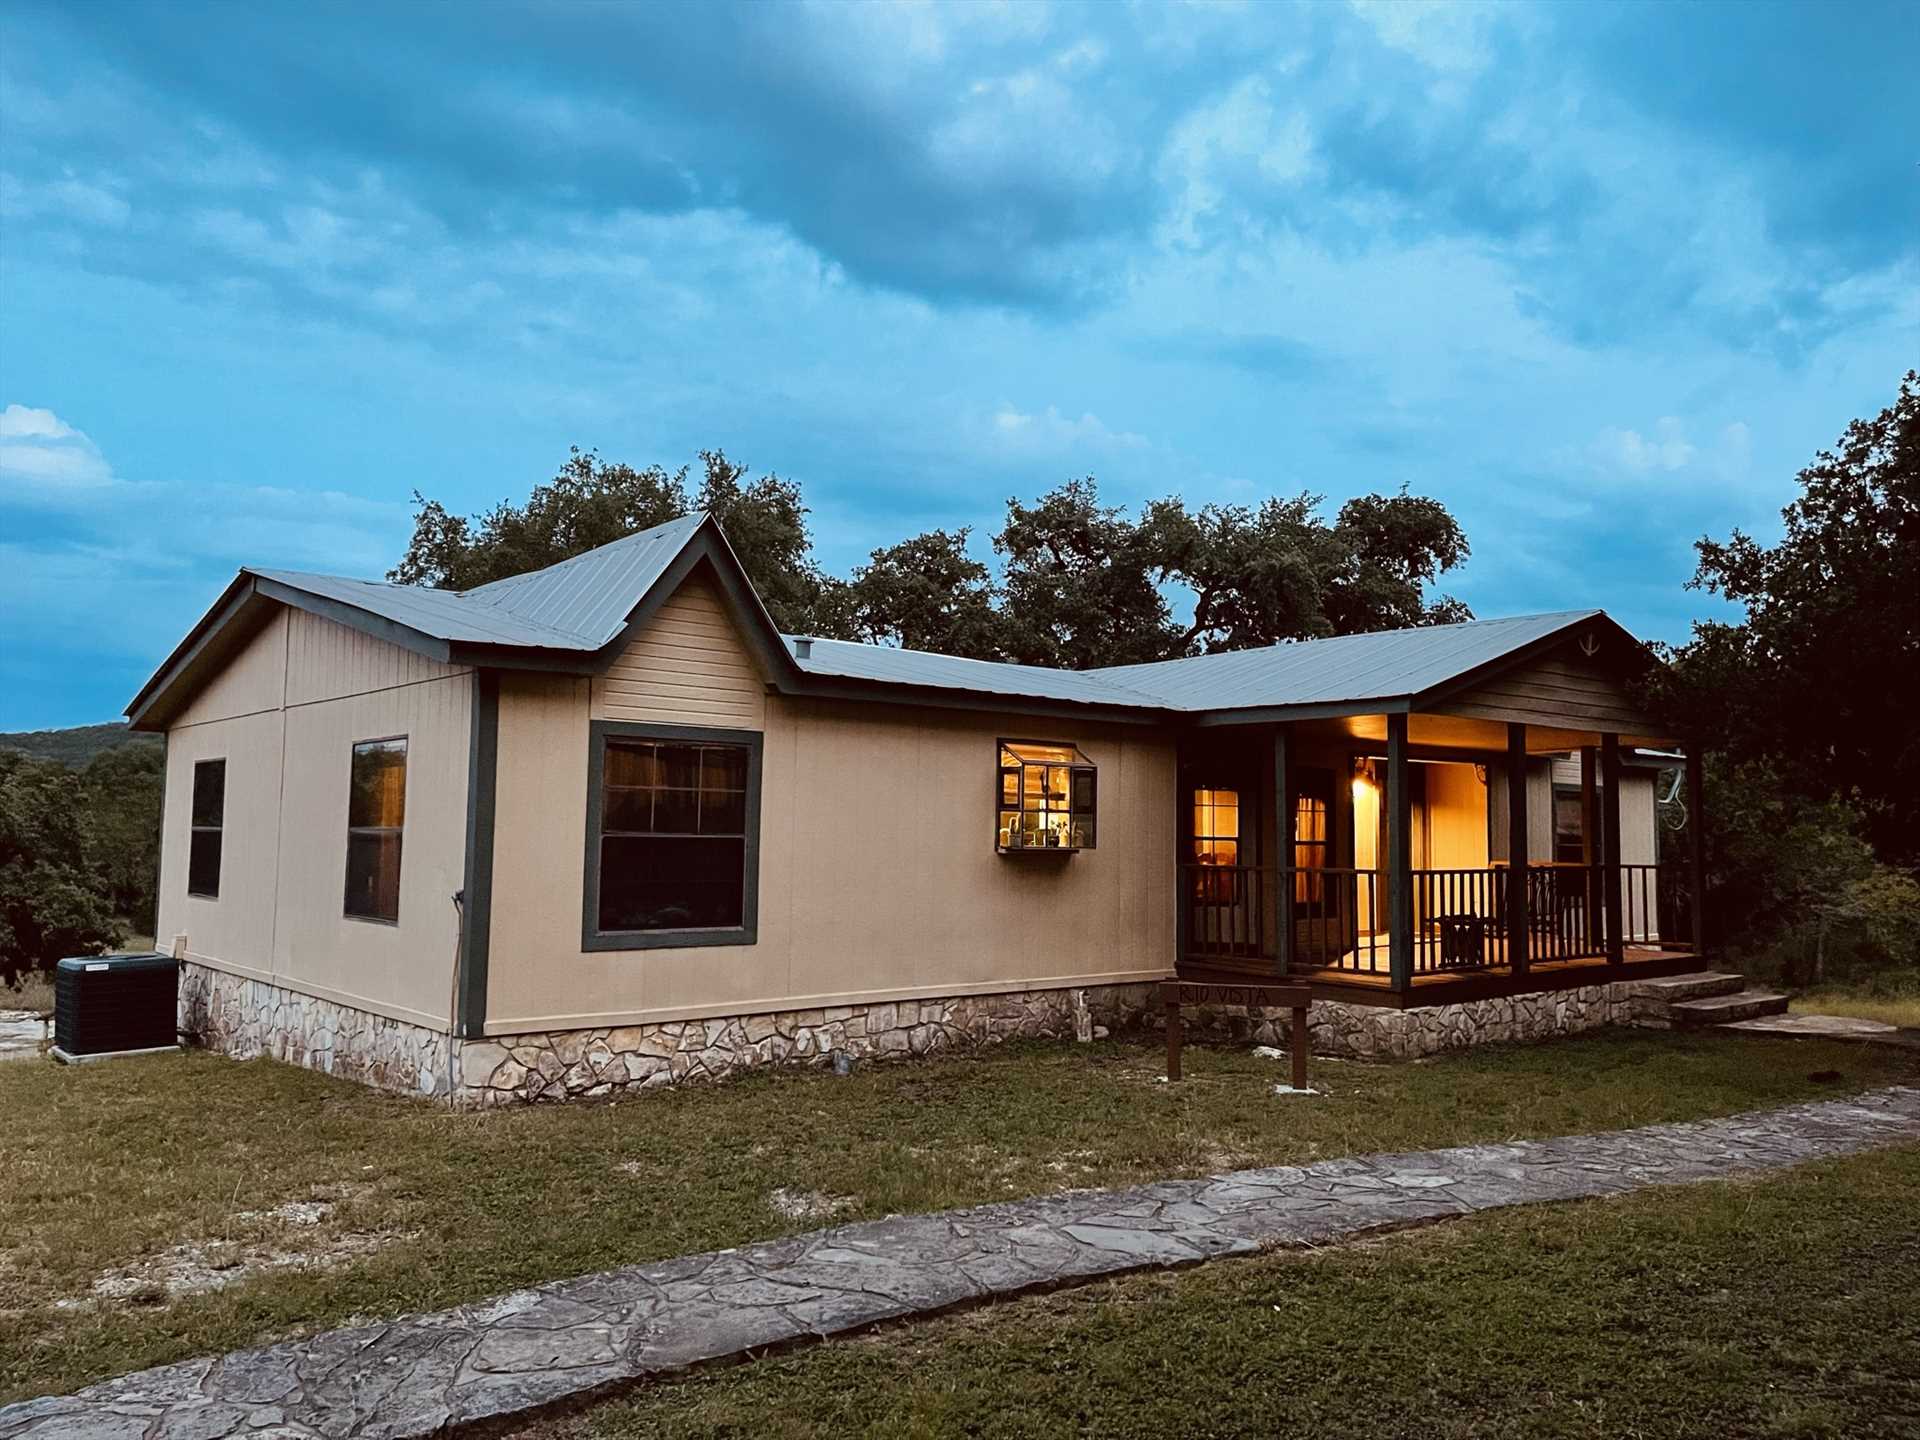                                                 A cozy front porch, an enormous deck out back, and a charcoal grill are just some of the outdoor amenities you'll enjoy at Rio Vista the second of six guest quarters at the Retreat!